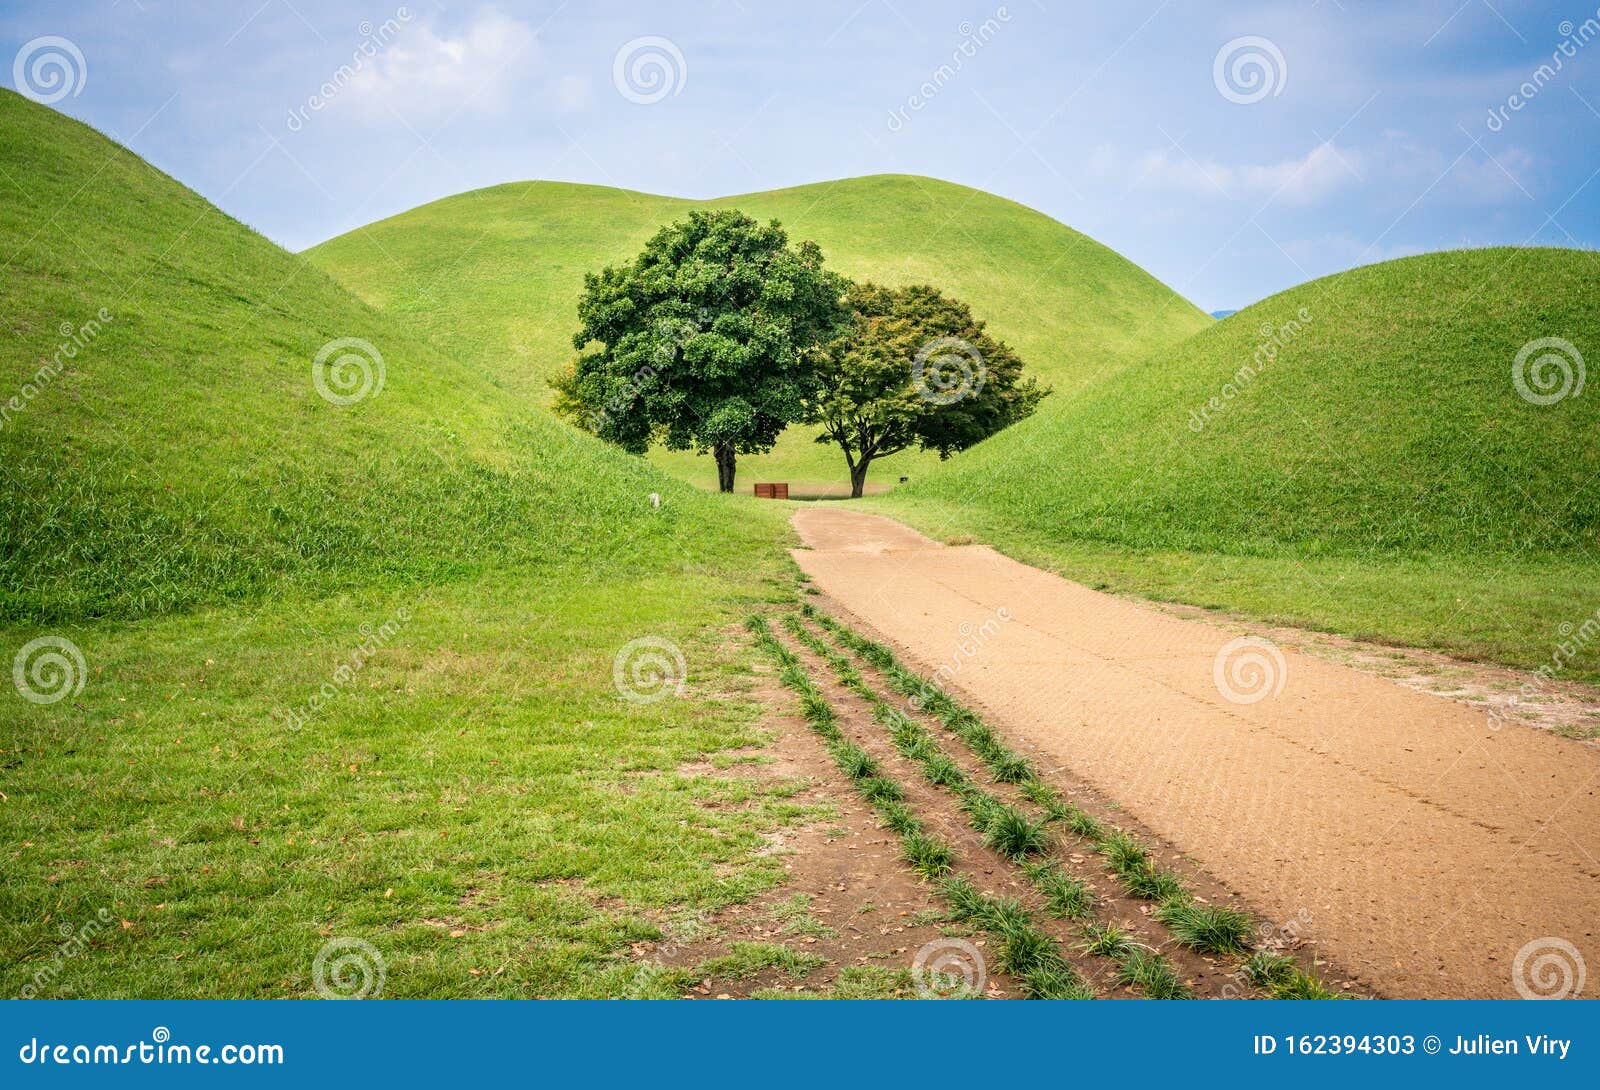 tumuli park or daereungwon tomb complex scenic view with several tumulus and green trees in middle gyeongju south korea